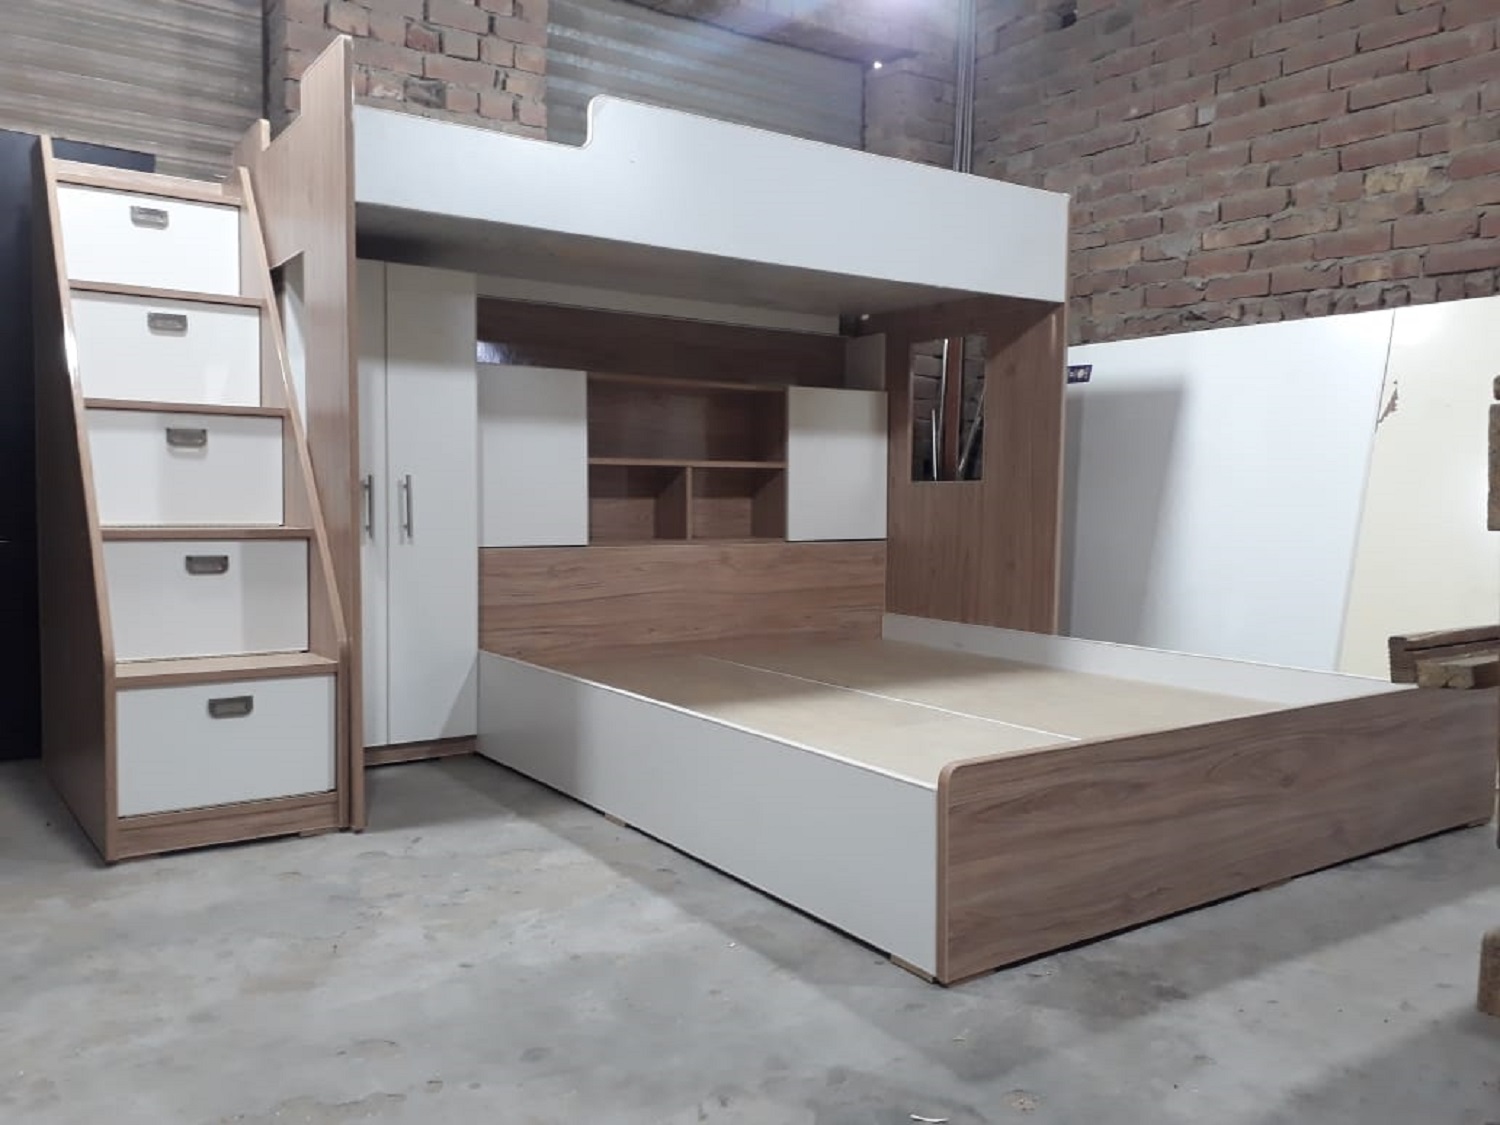 Lower Queen Size Bunk With Wardrobe